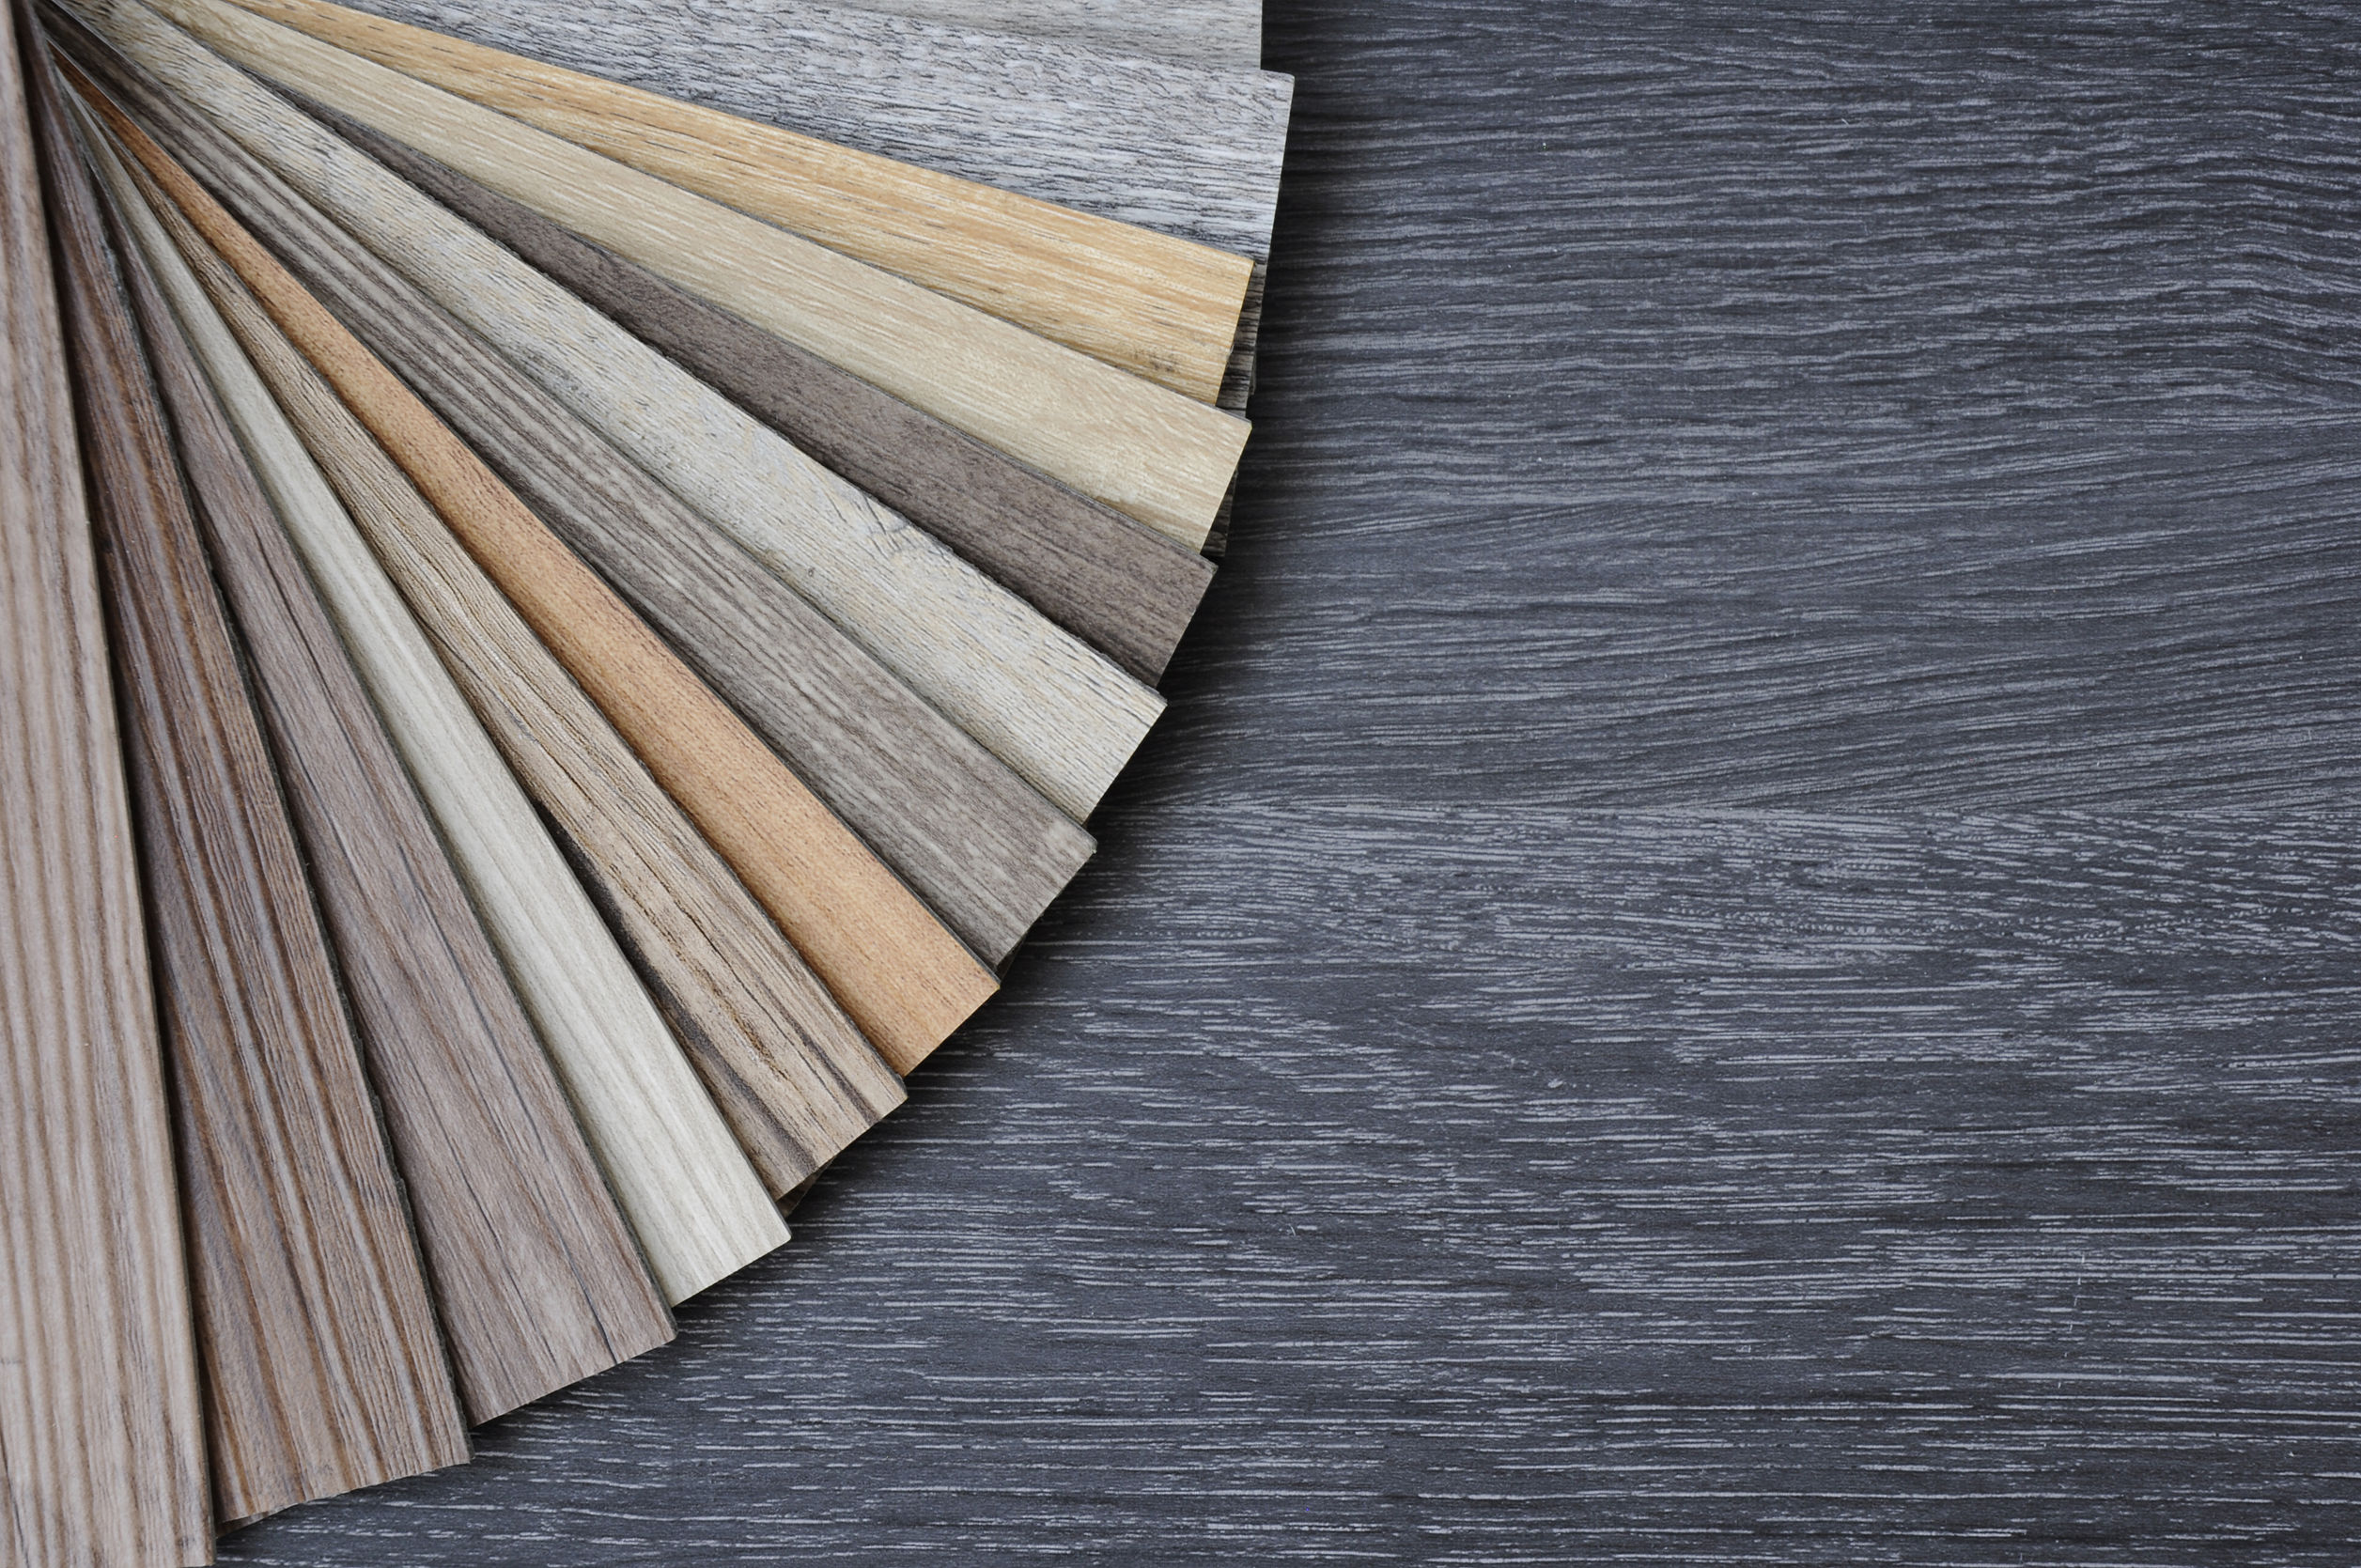 Samples of melamine and wood textures for store fixtures and display cases.